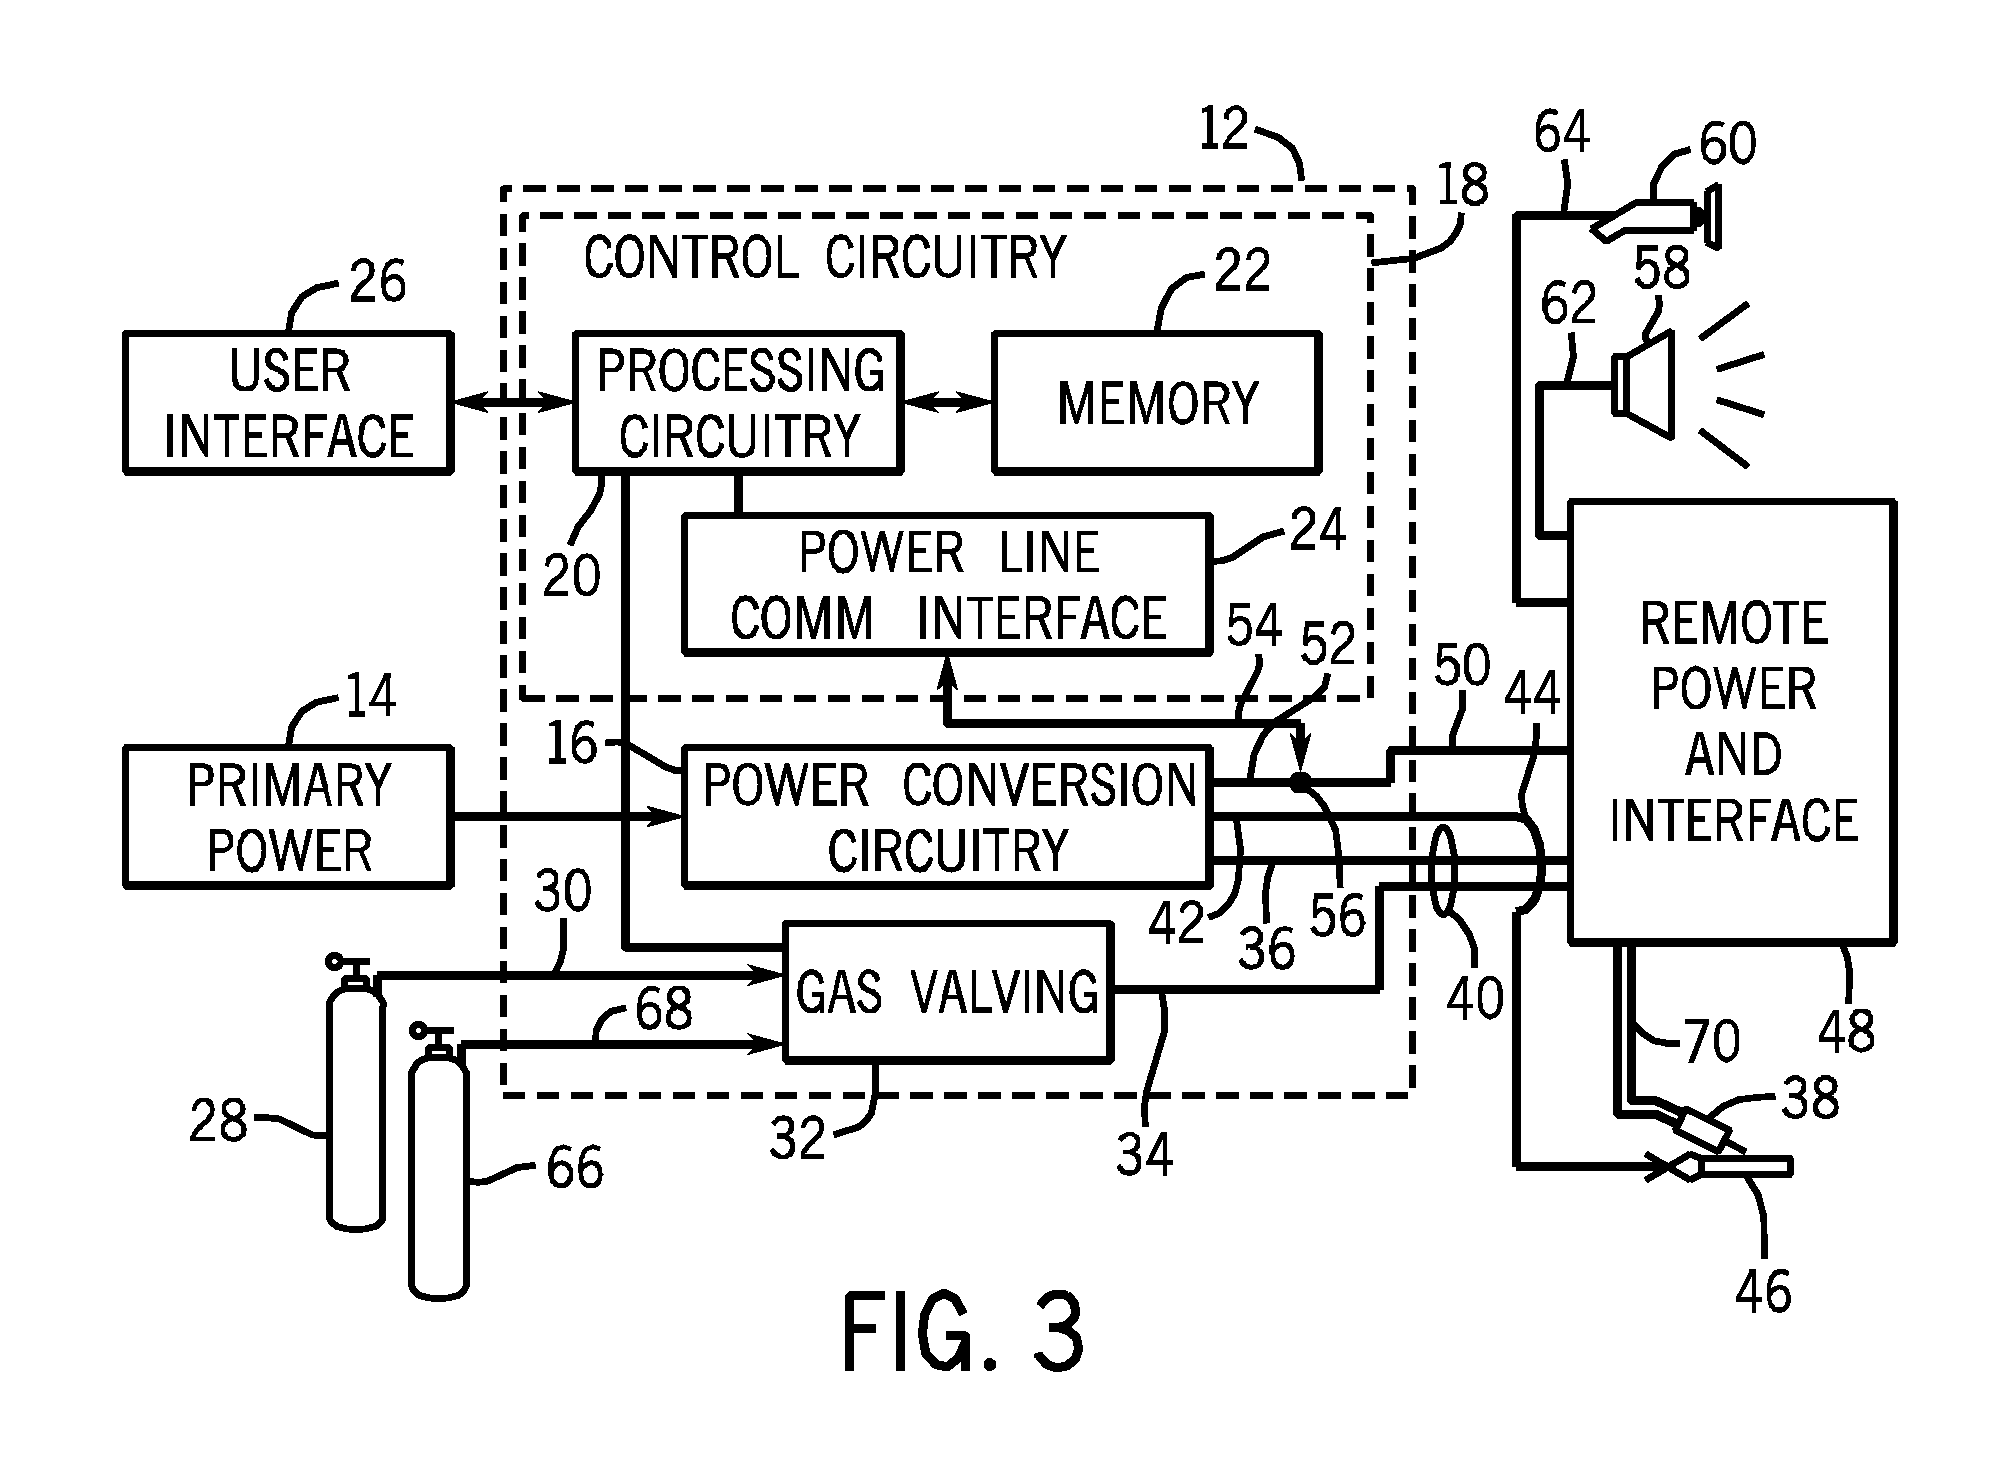 Welding system with power line communication